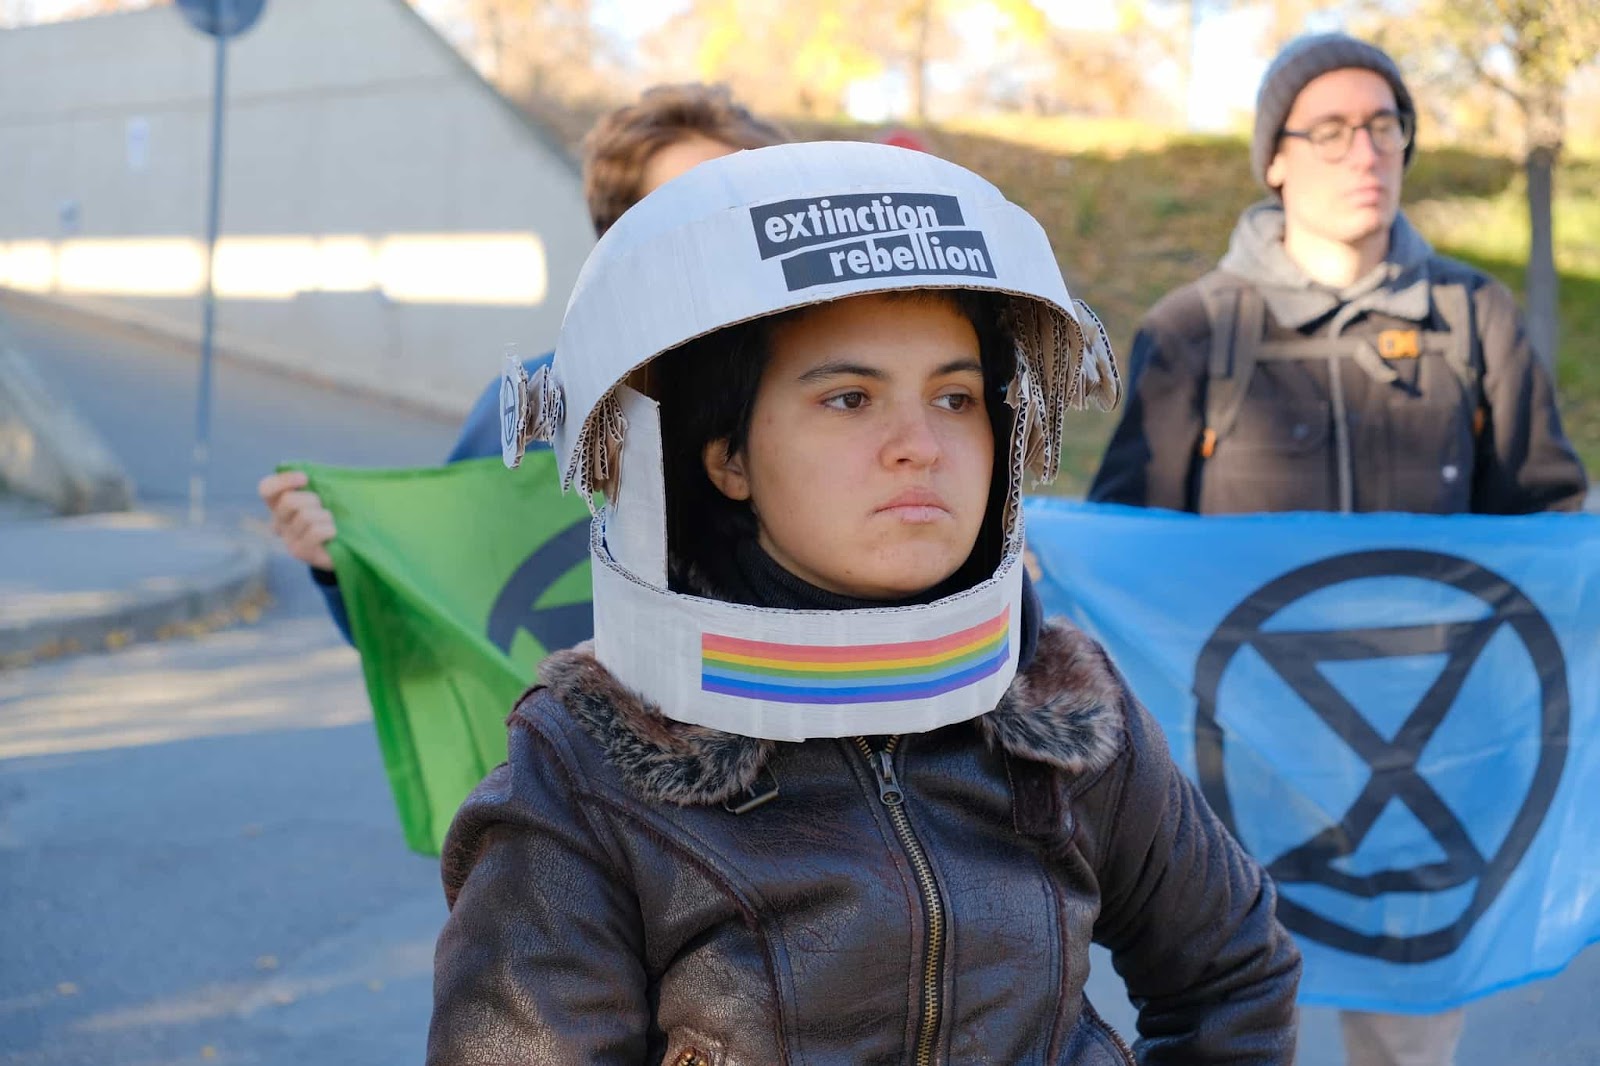 A rebel wears a homemade astronaught helmet with XR insignia and rainbows